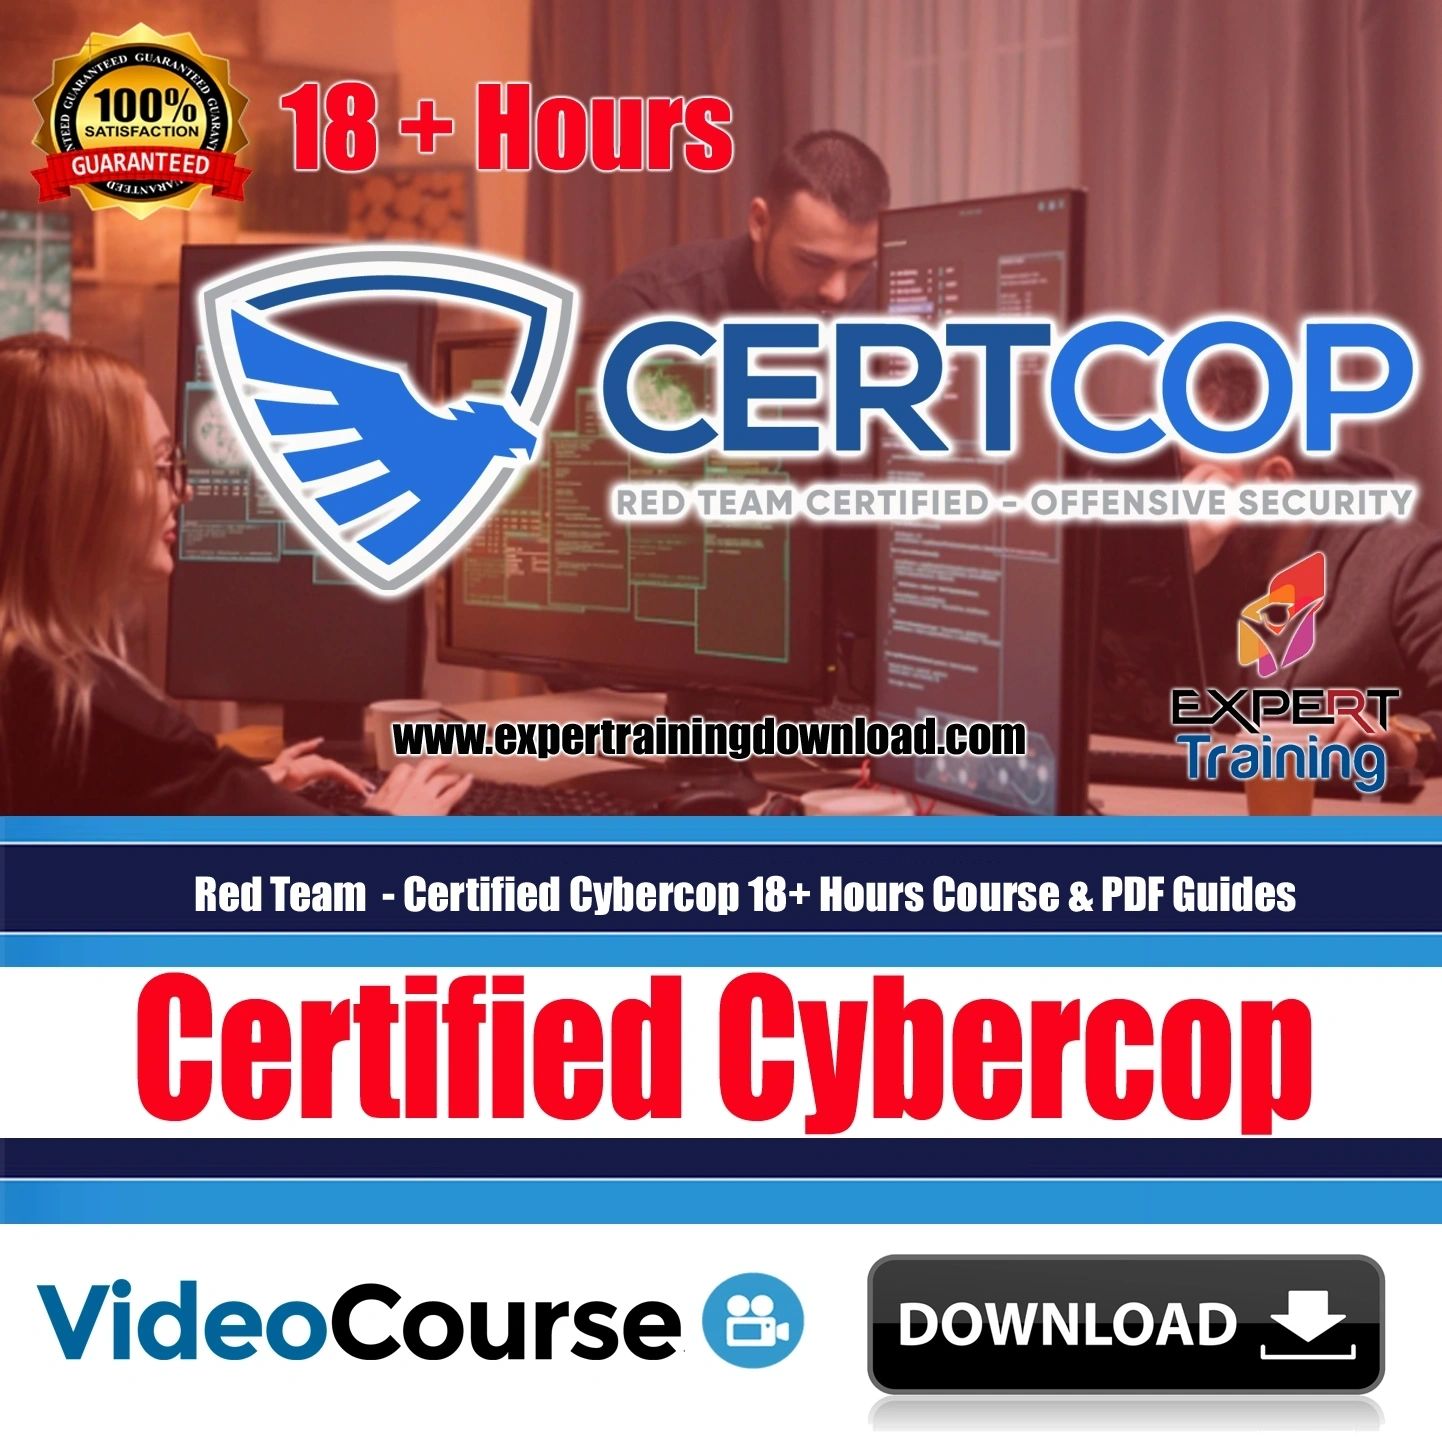 Red Team – Certified Cybercop (18 Hours) Course & PDF Guides